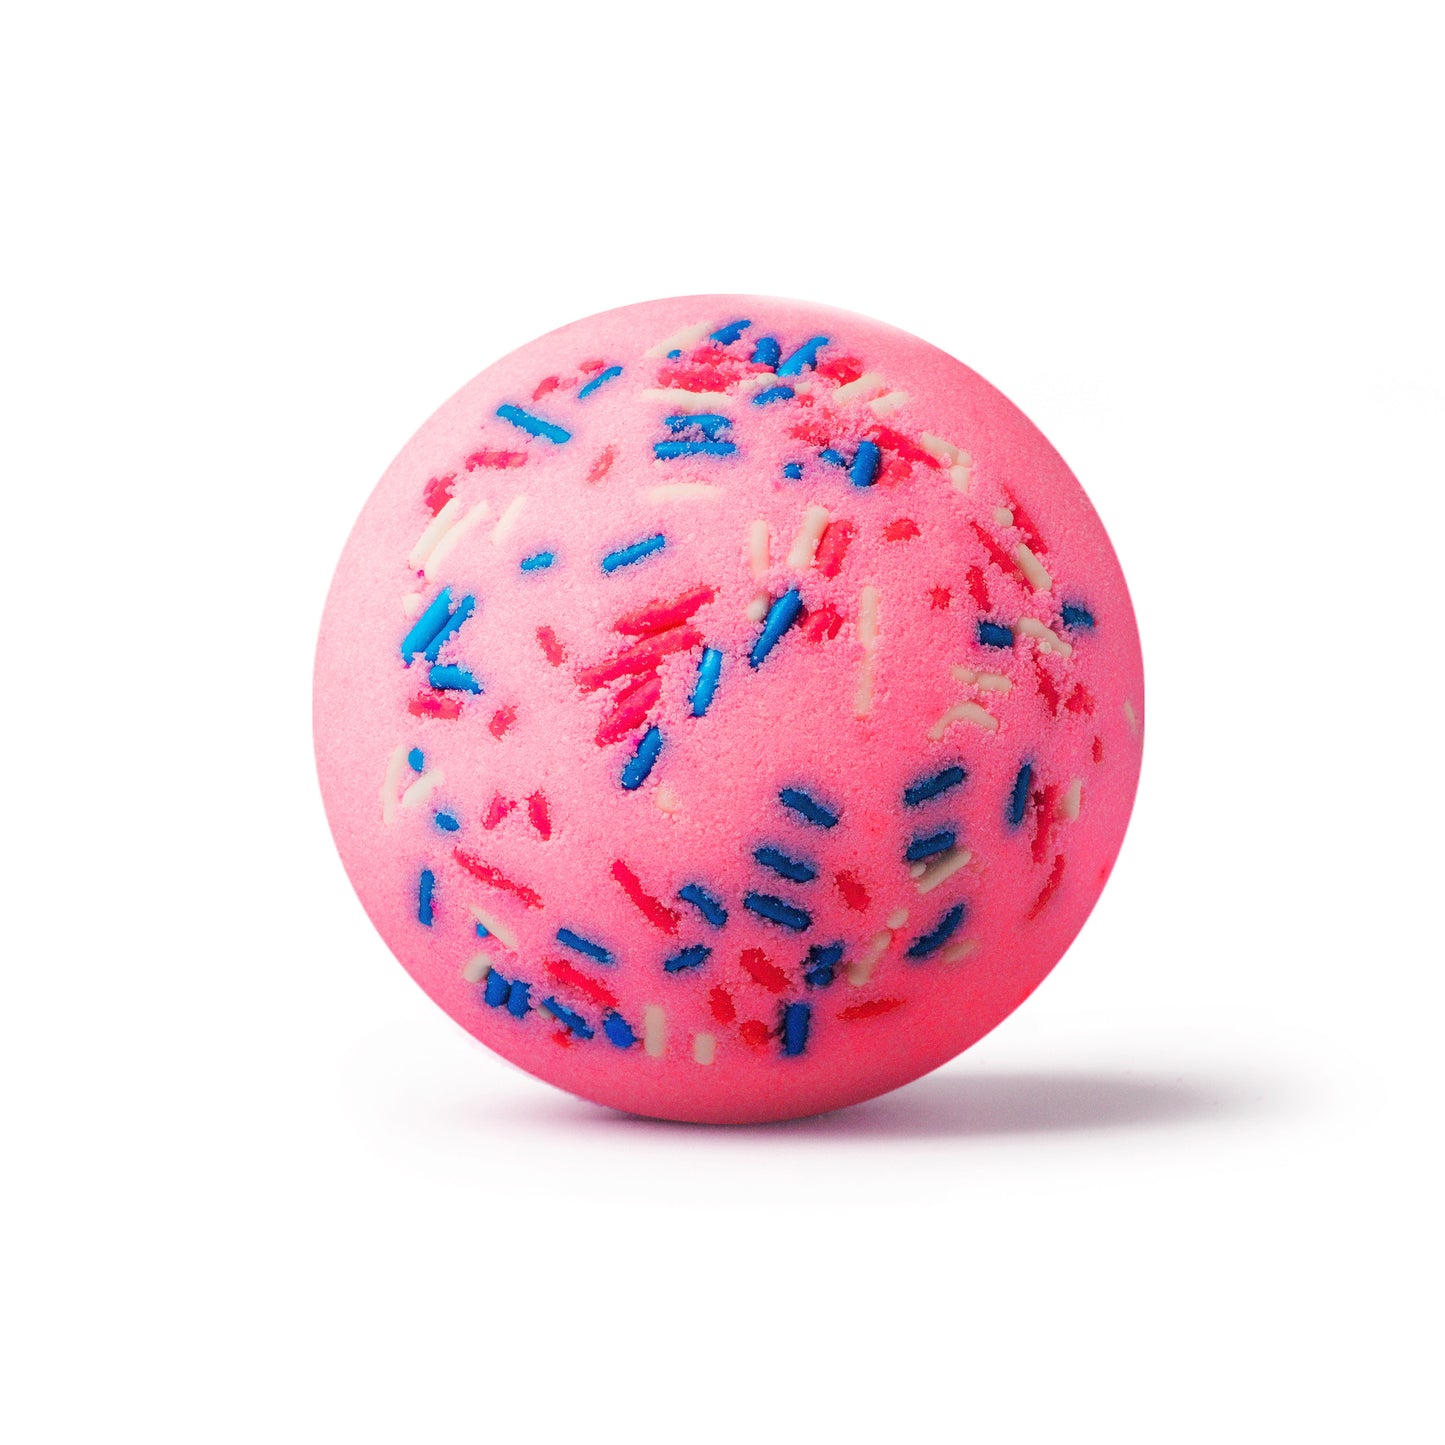 a pink bath bomb with blue, red & white sprinkles